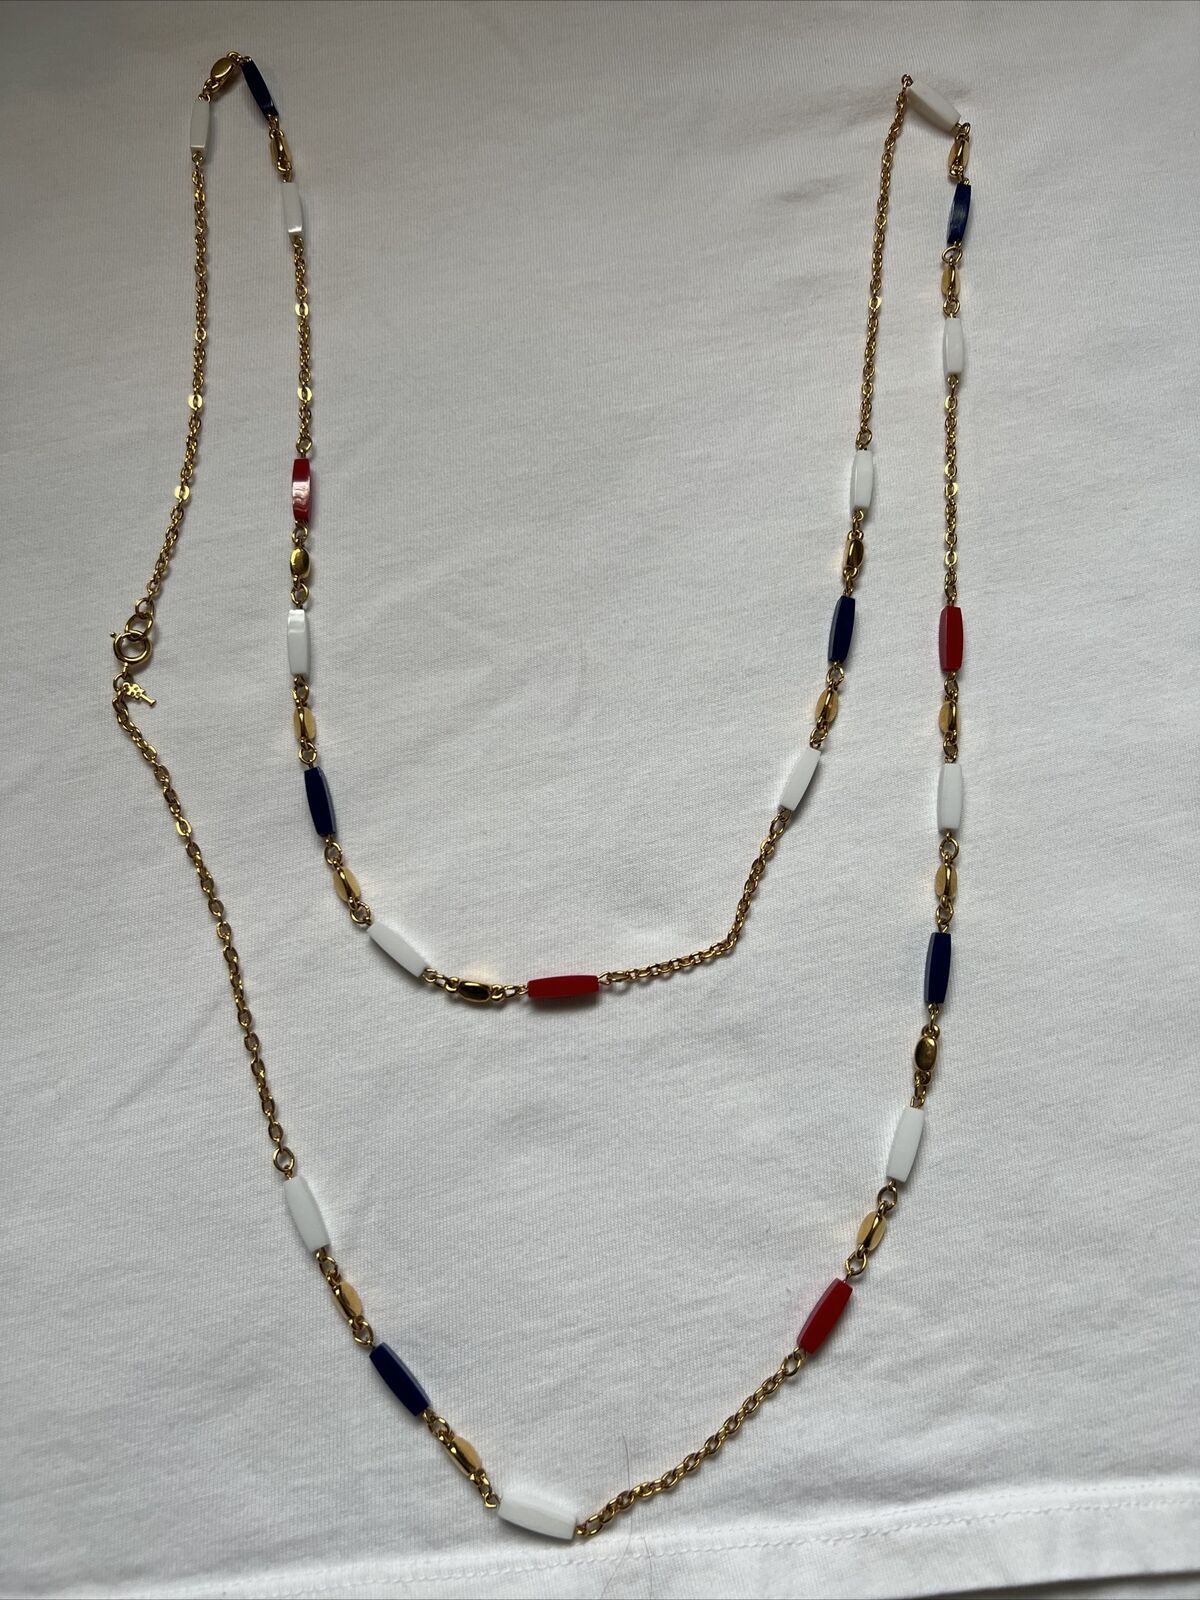 Trifari necklace vintage Red White And Blue 54” - image 1